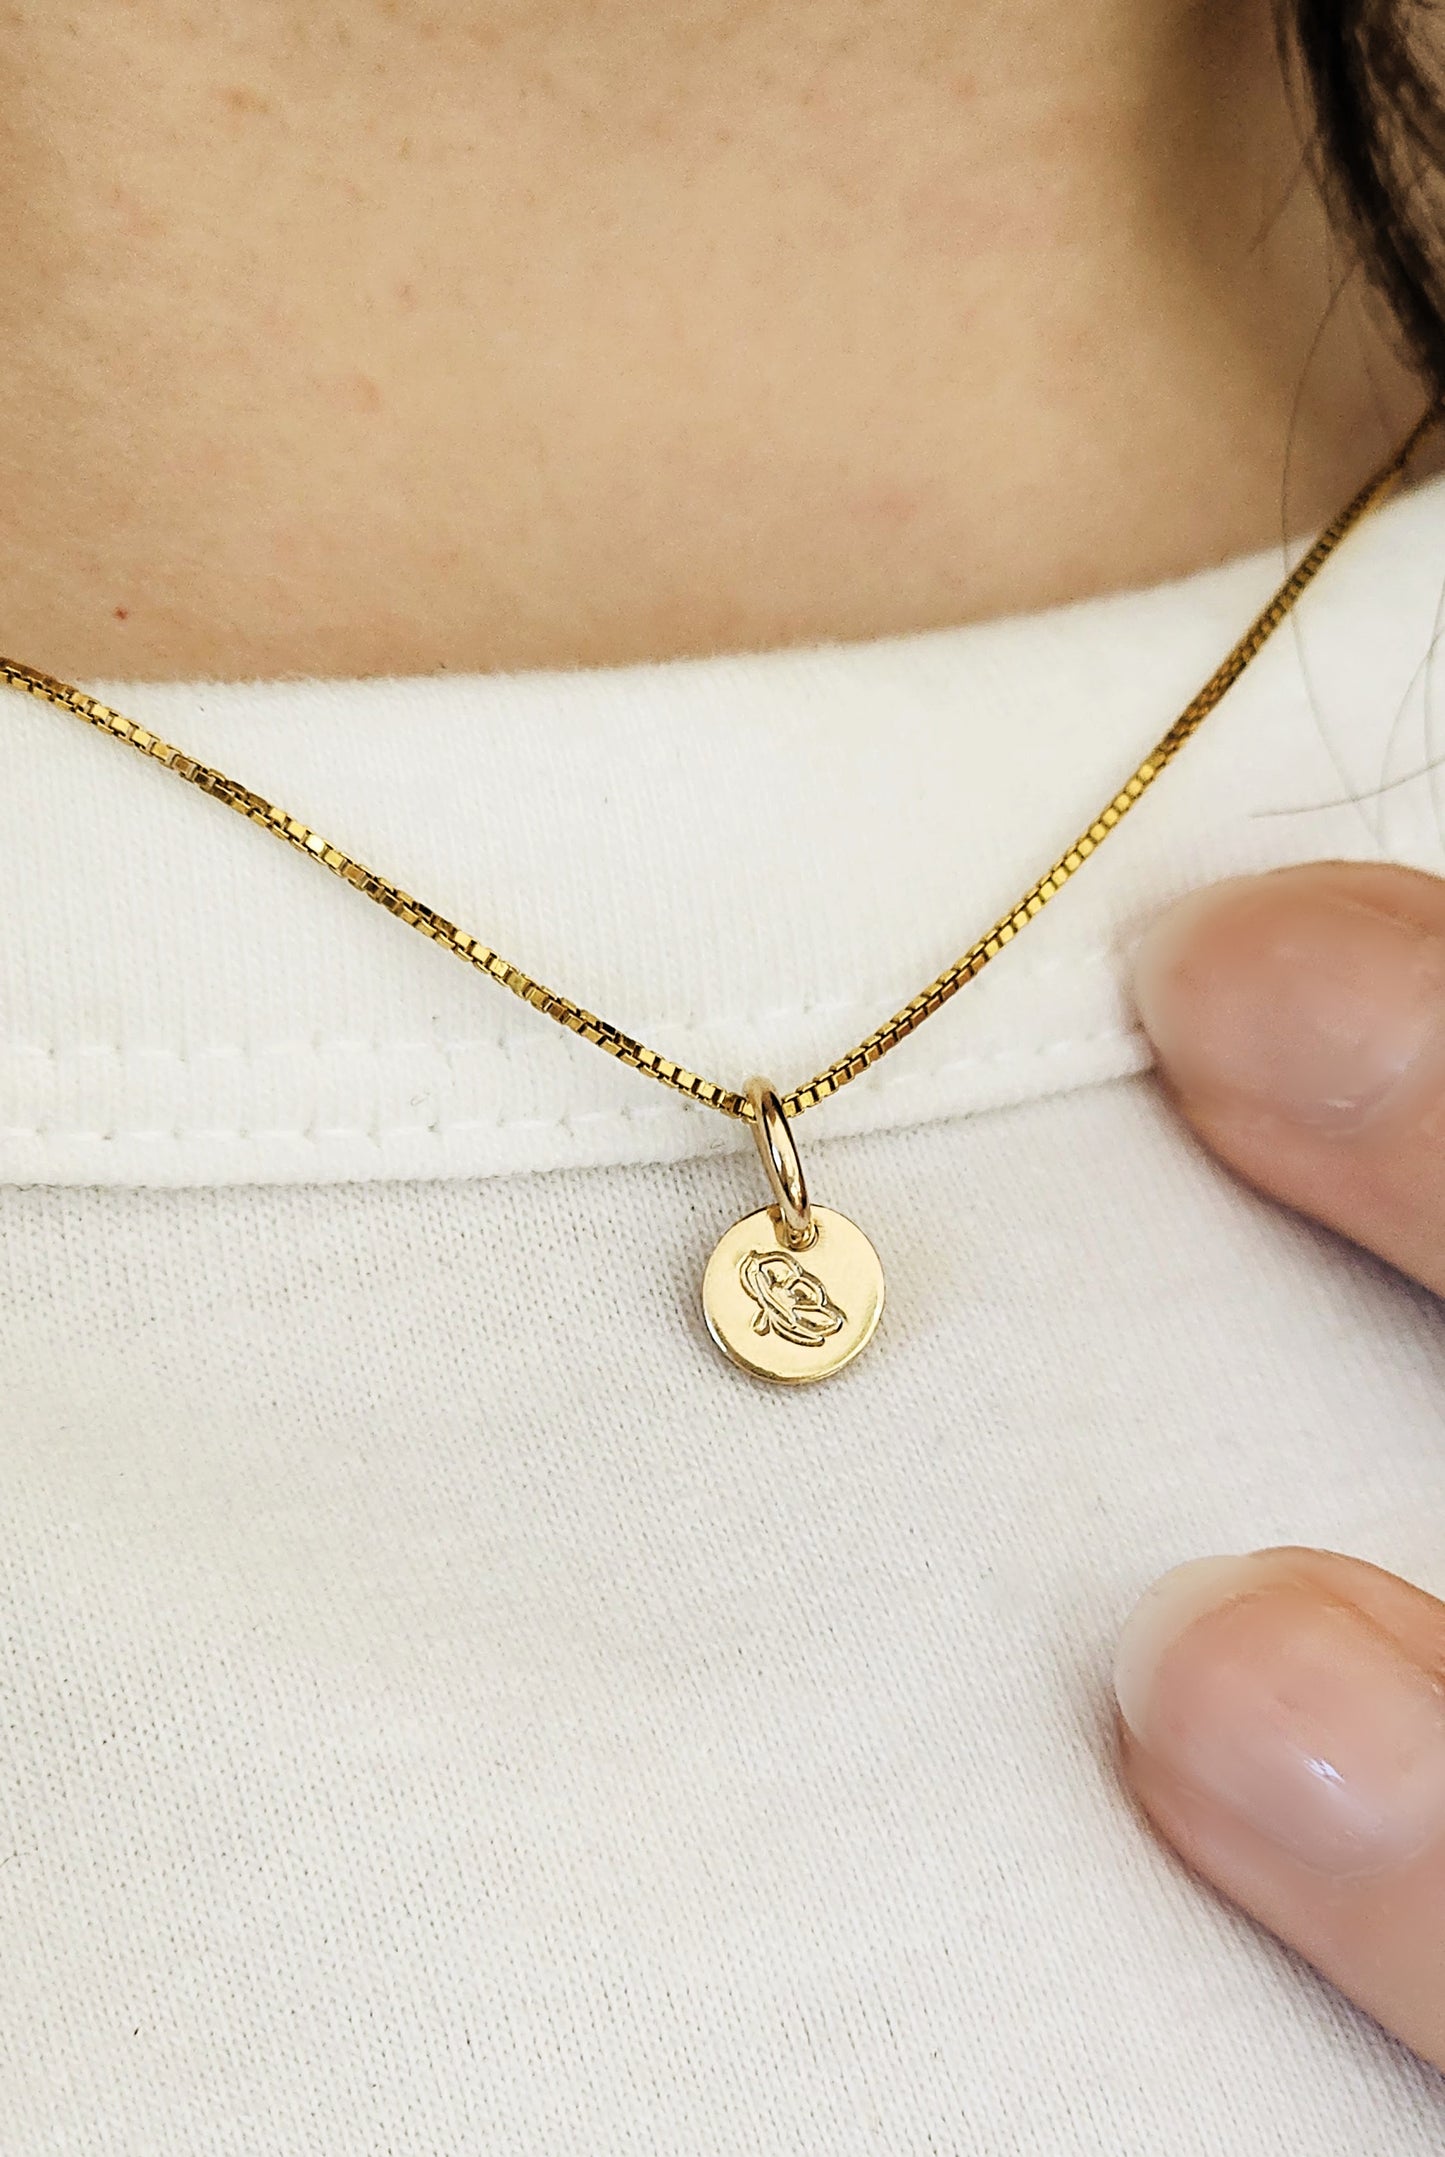 Minimalist Tag Necklace - Going Golden